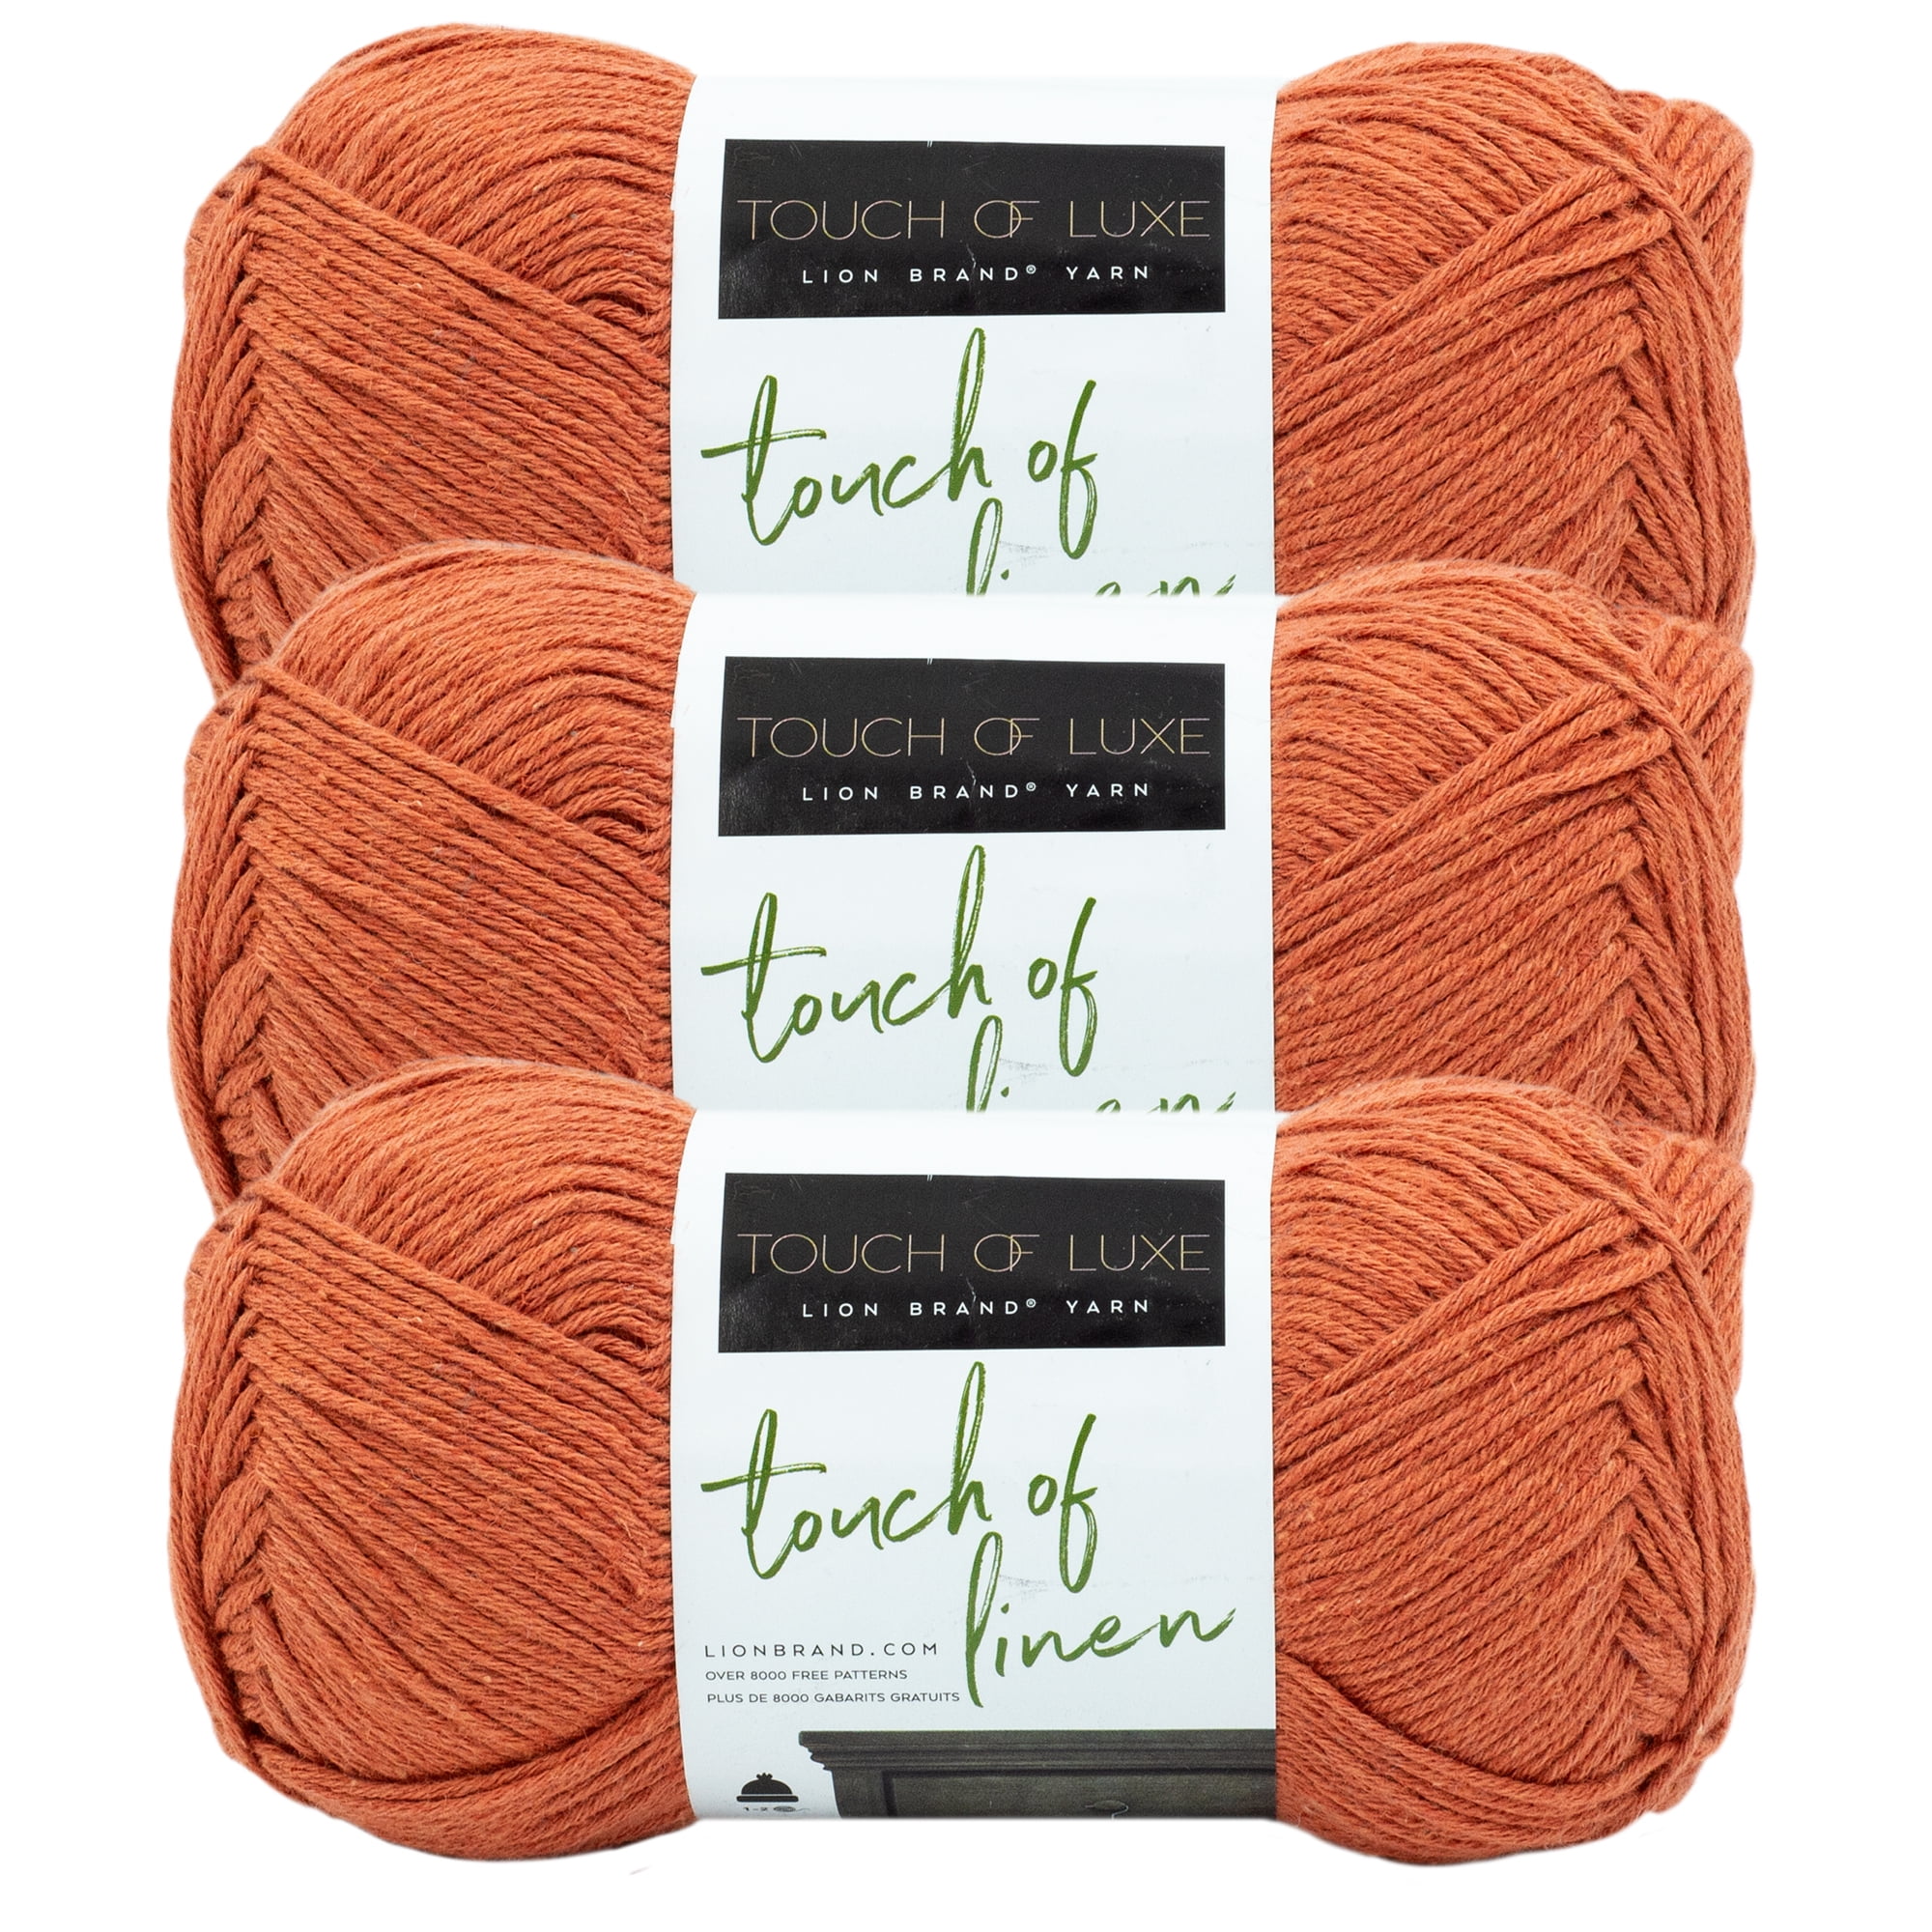 Touch of Linen Yarn